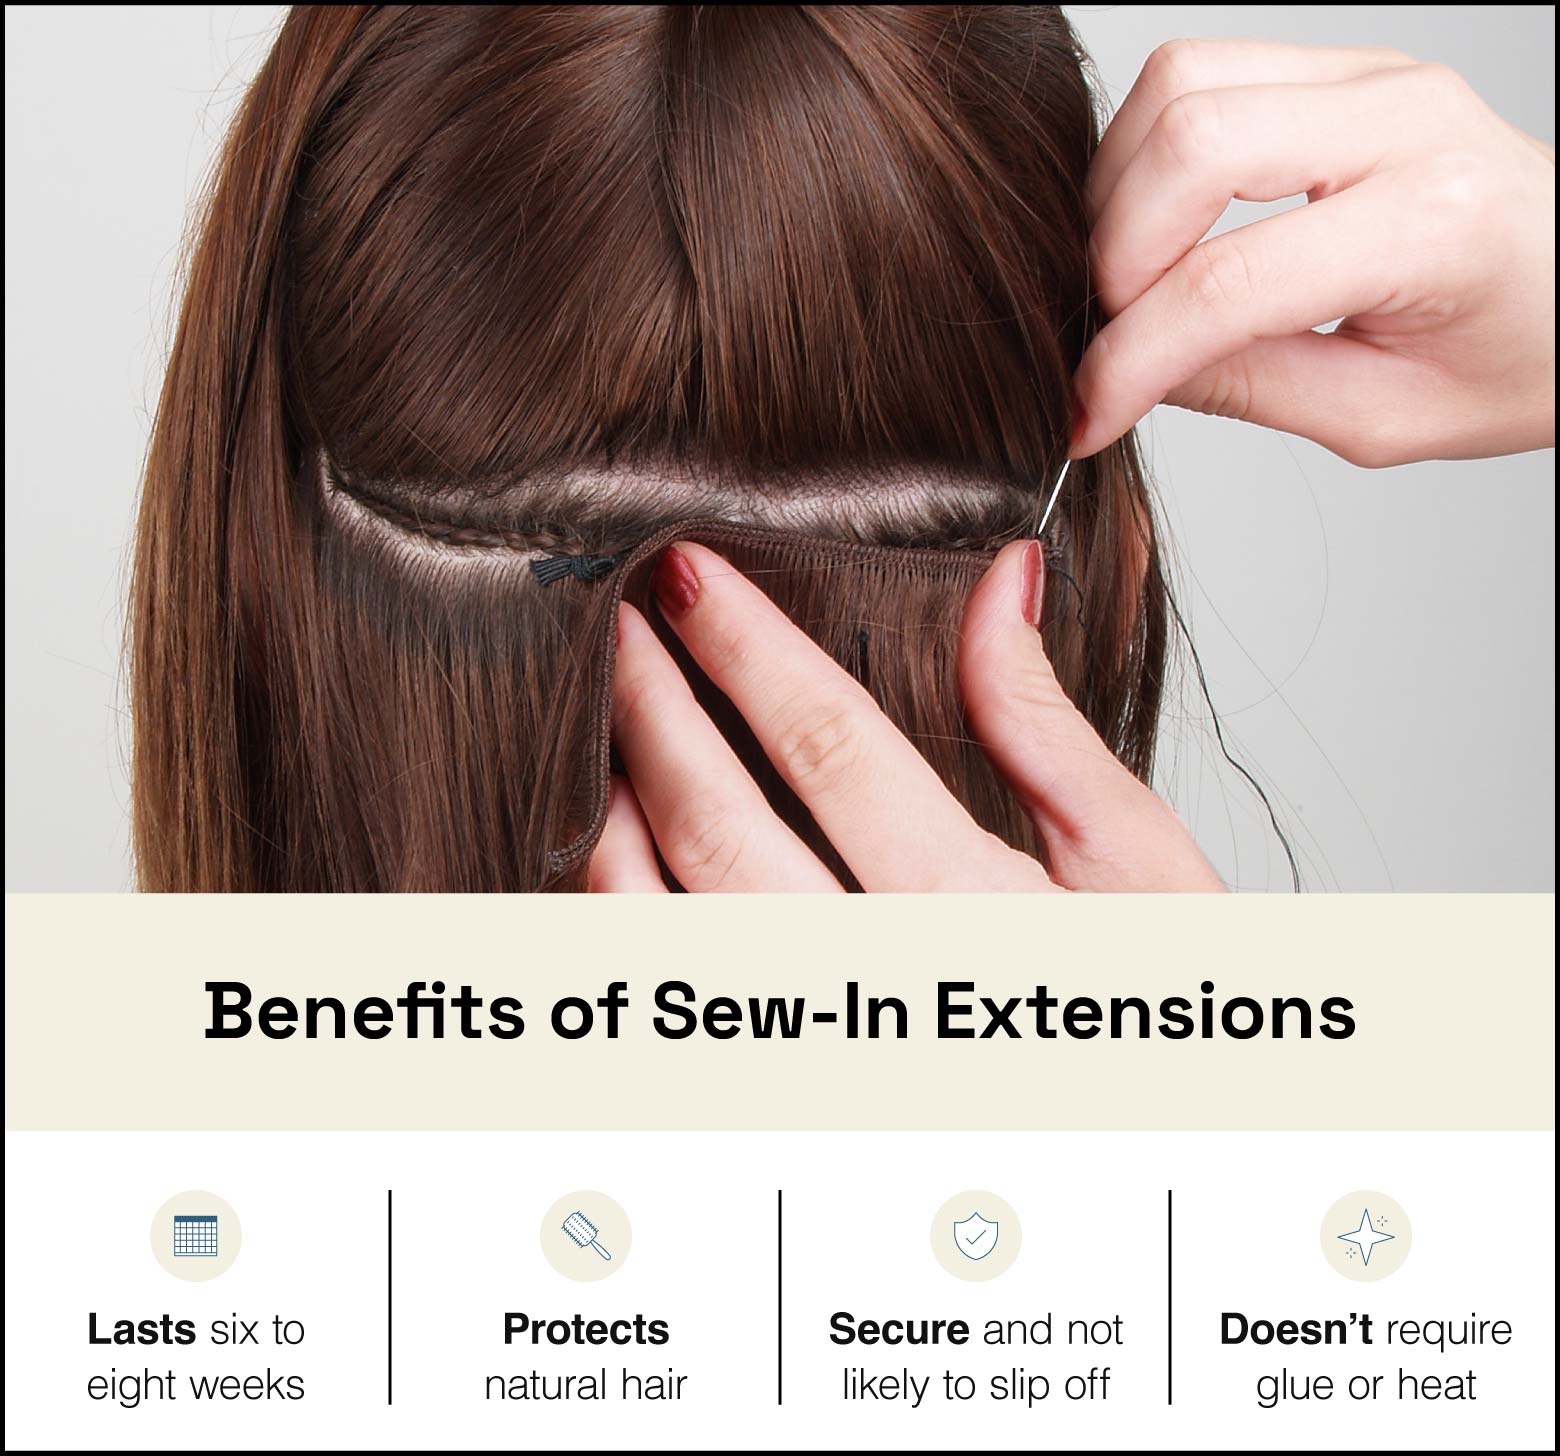 Image of stylist sewing in extensions with text below summarizing sew-in extension benefits.